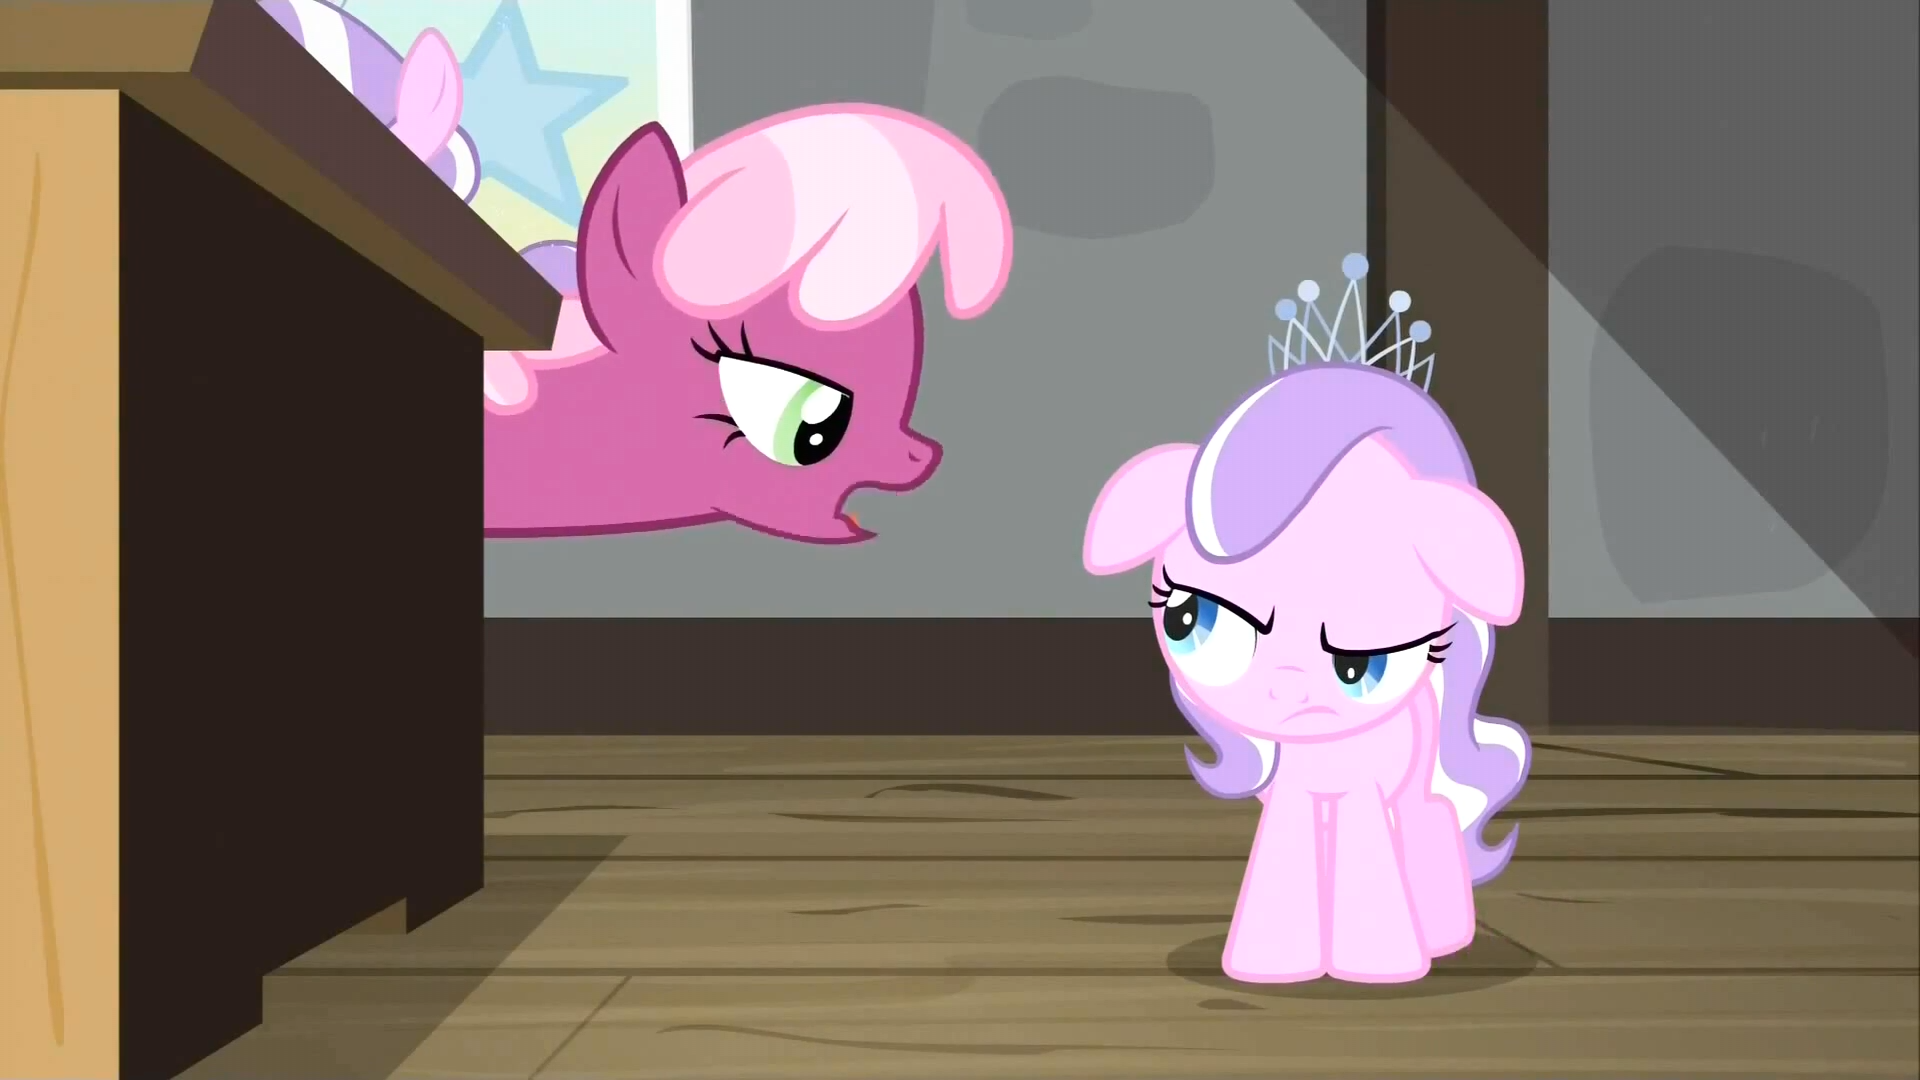 http://img3.wikia.nocookie.net/__cb20120403165904/mlp/images/2/28/Cheerilee_dismisses_Diamond_Tiara_as_the_Editor-in-chief_S2E23.png